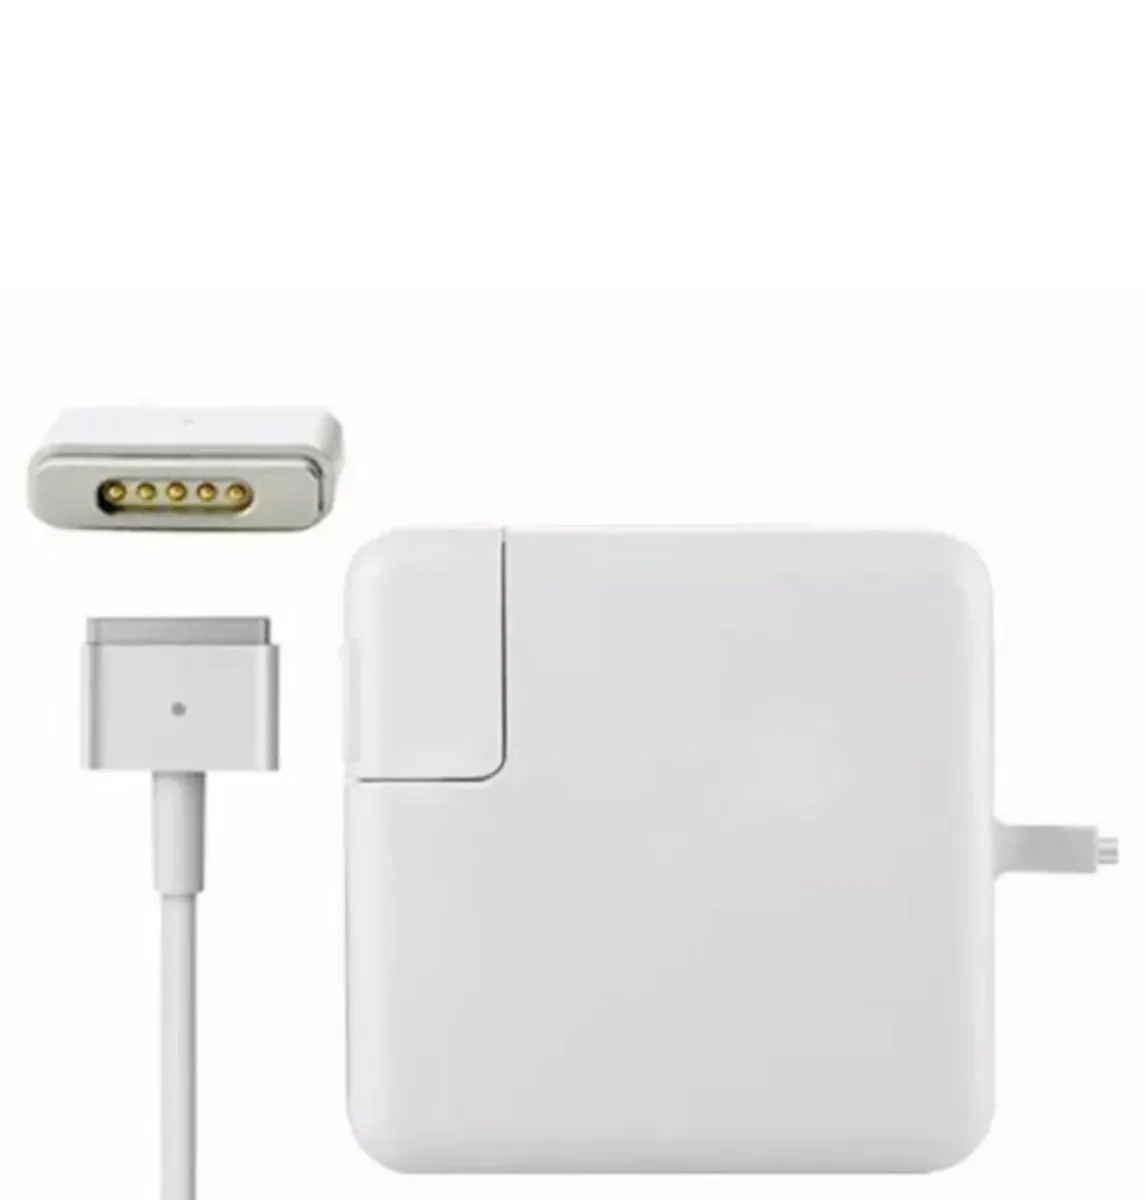 Apple 60W MagSafe 2 Power Adapter Compatible (We have other Macbook models) - Image 1